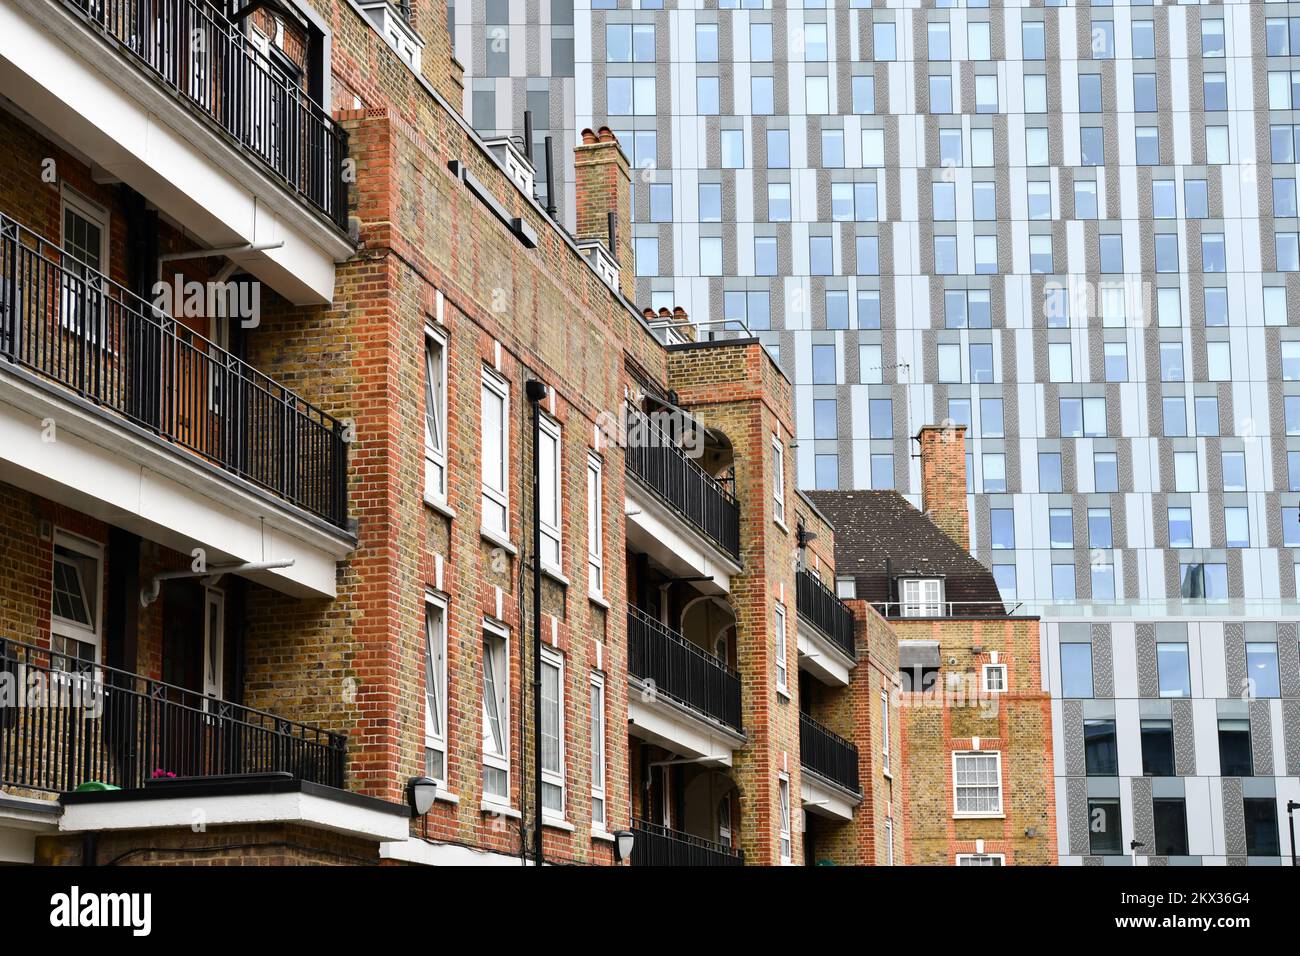 Carter House flats on Brune Street in Spitalfields contrasting with backdrop of offices in the City of London Stock Photo